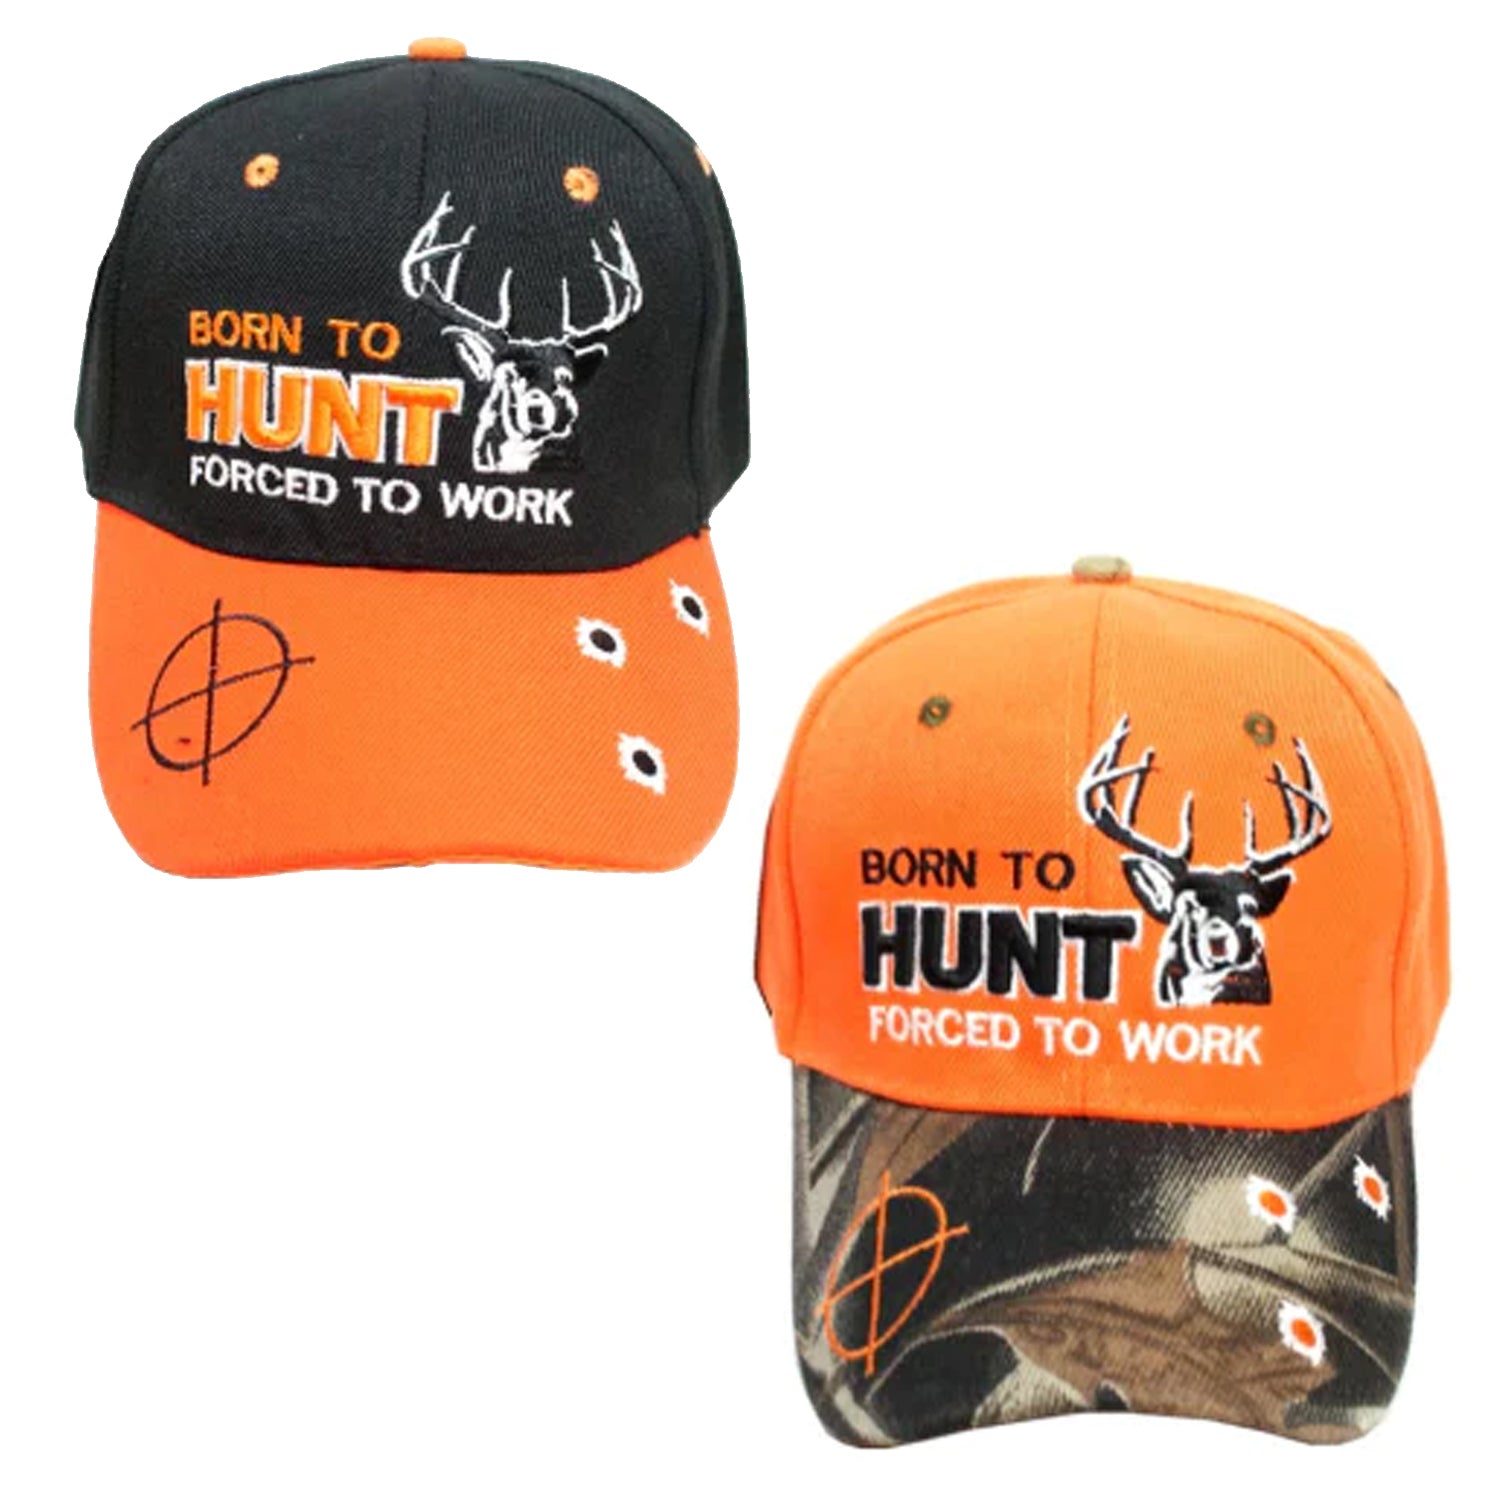 Born To Hunt Forced To Work Casual Caps - Show Your Passion!